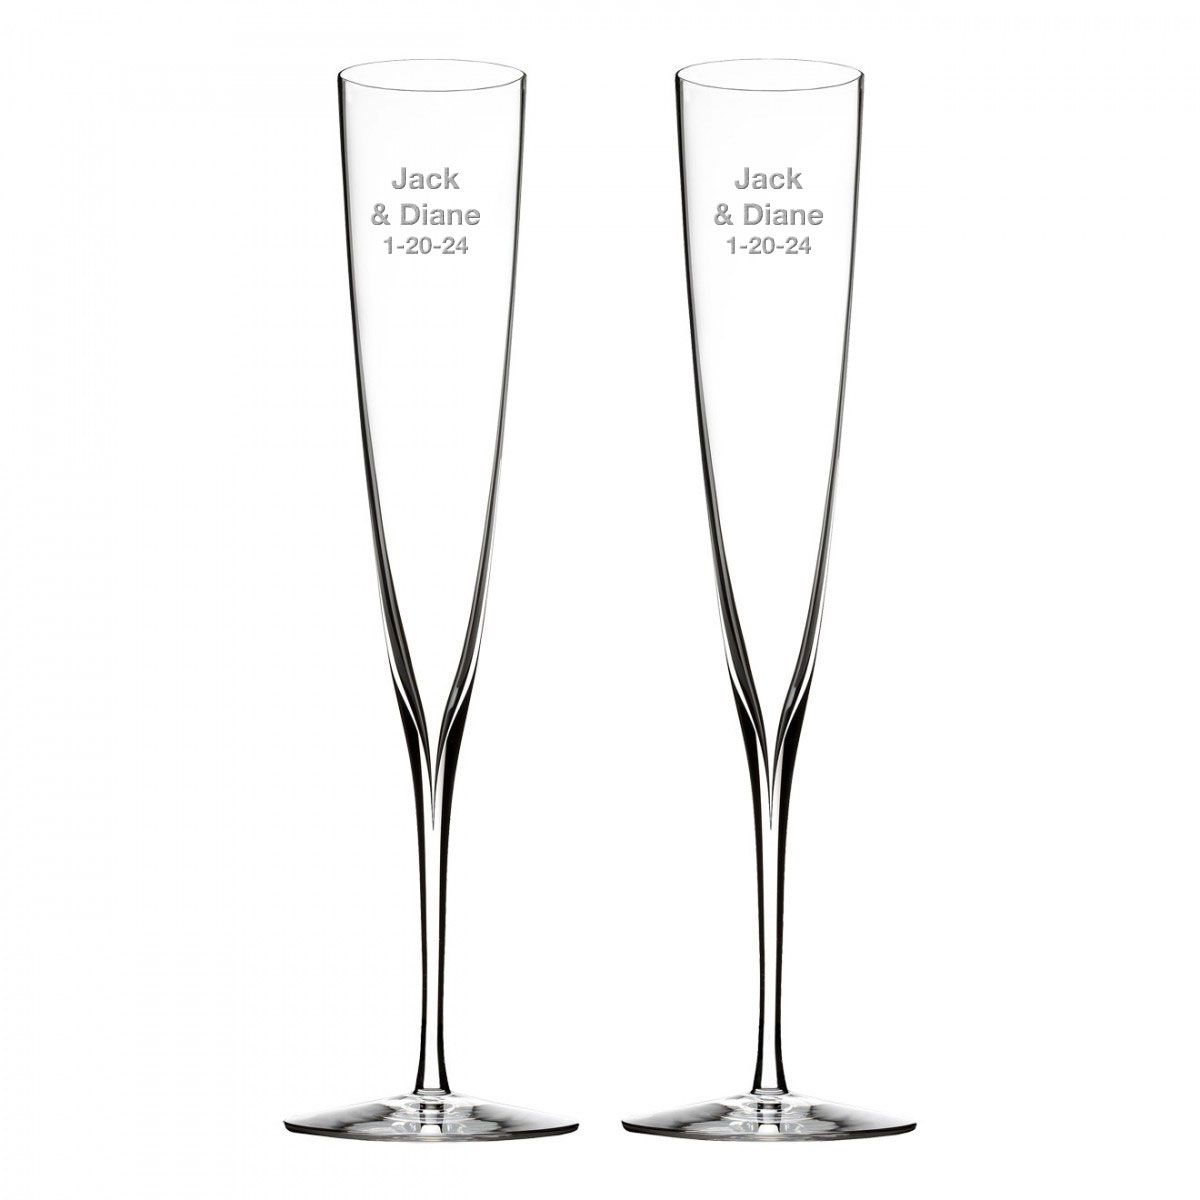 Waterford Crystal, Elegance Trumpet Champagne Toasting Flutes, Pair